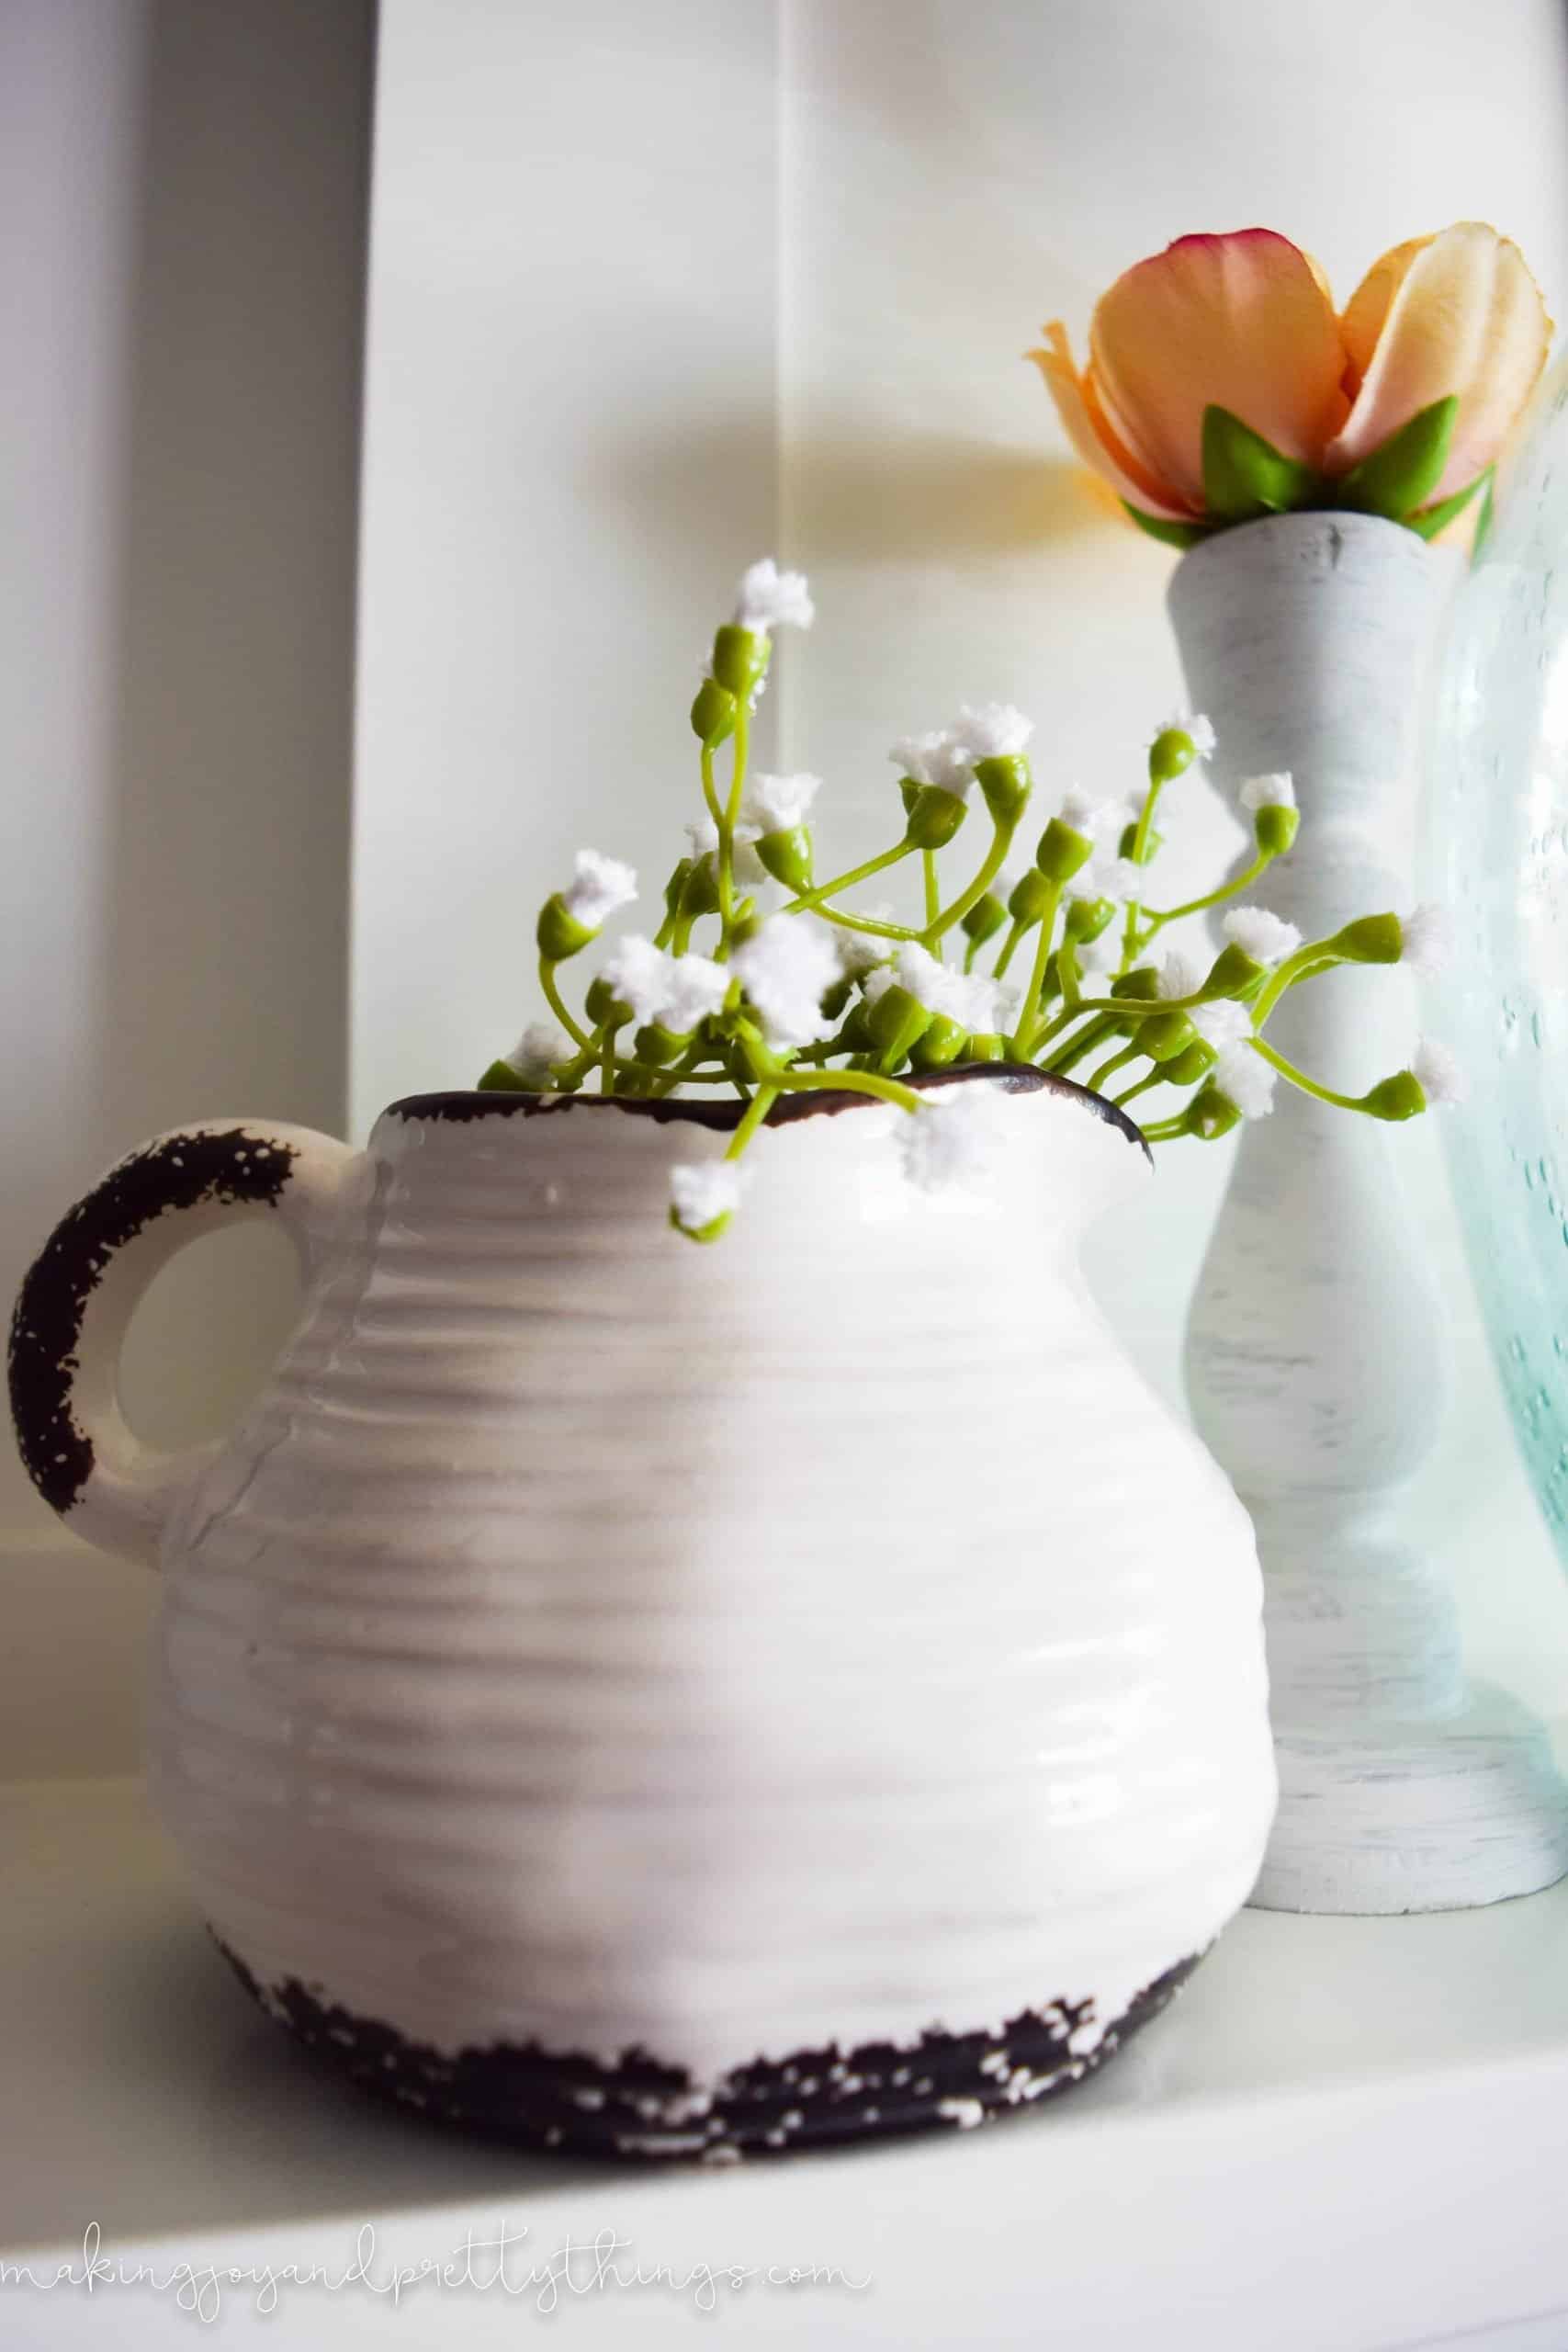 A close up look at a ceramic jar painted black and white, filled with sprigs of faux greenery with tiny white flower buds on the end.